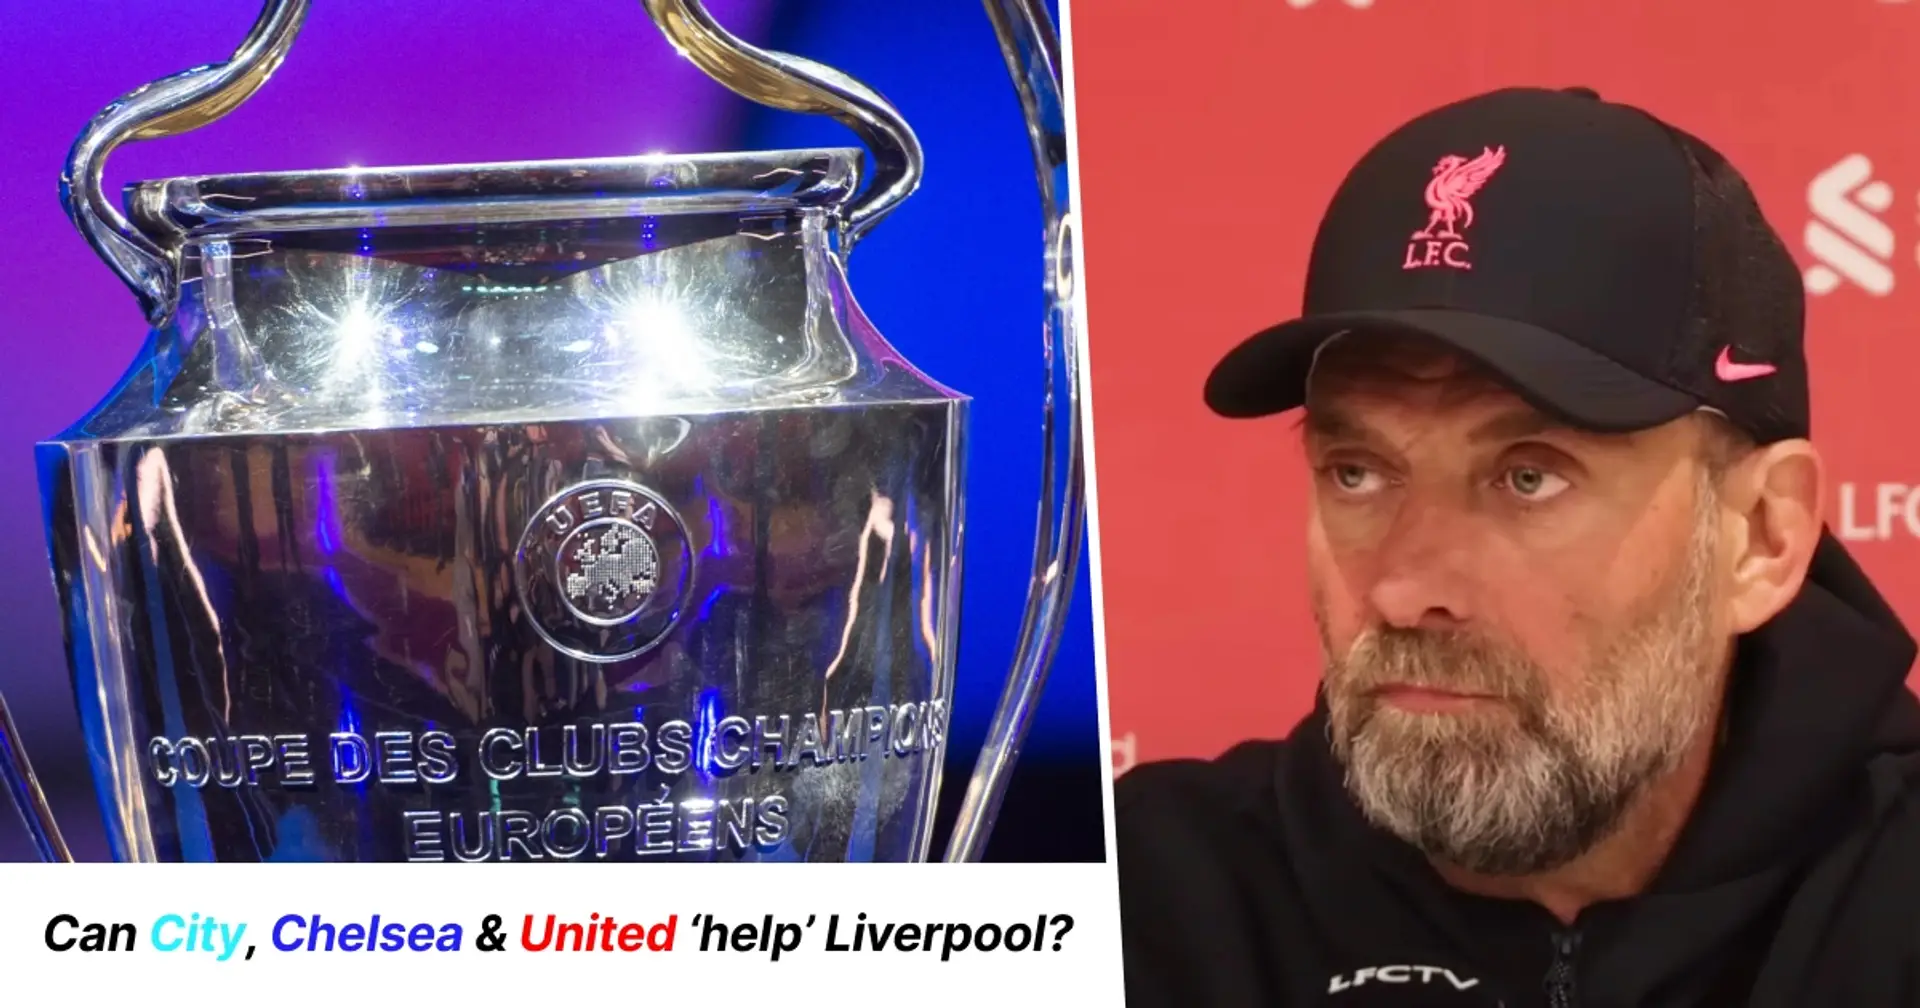 Could Liverpool qualify for Champions League by finishing 5th? Explained